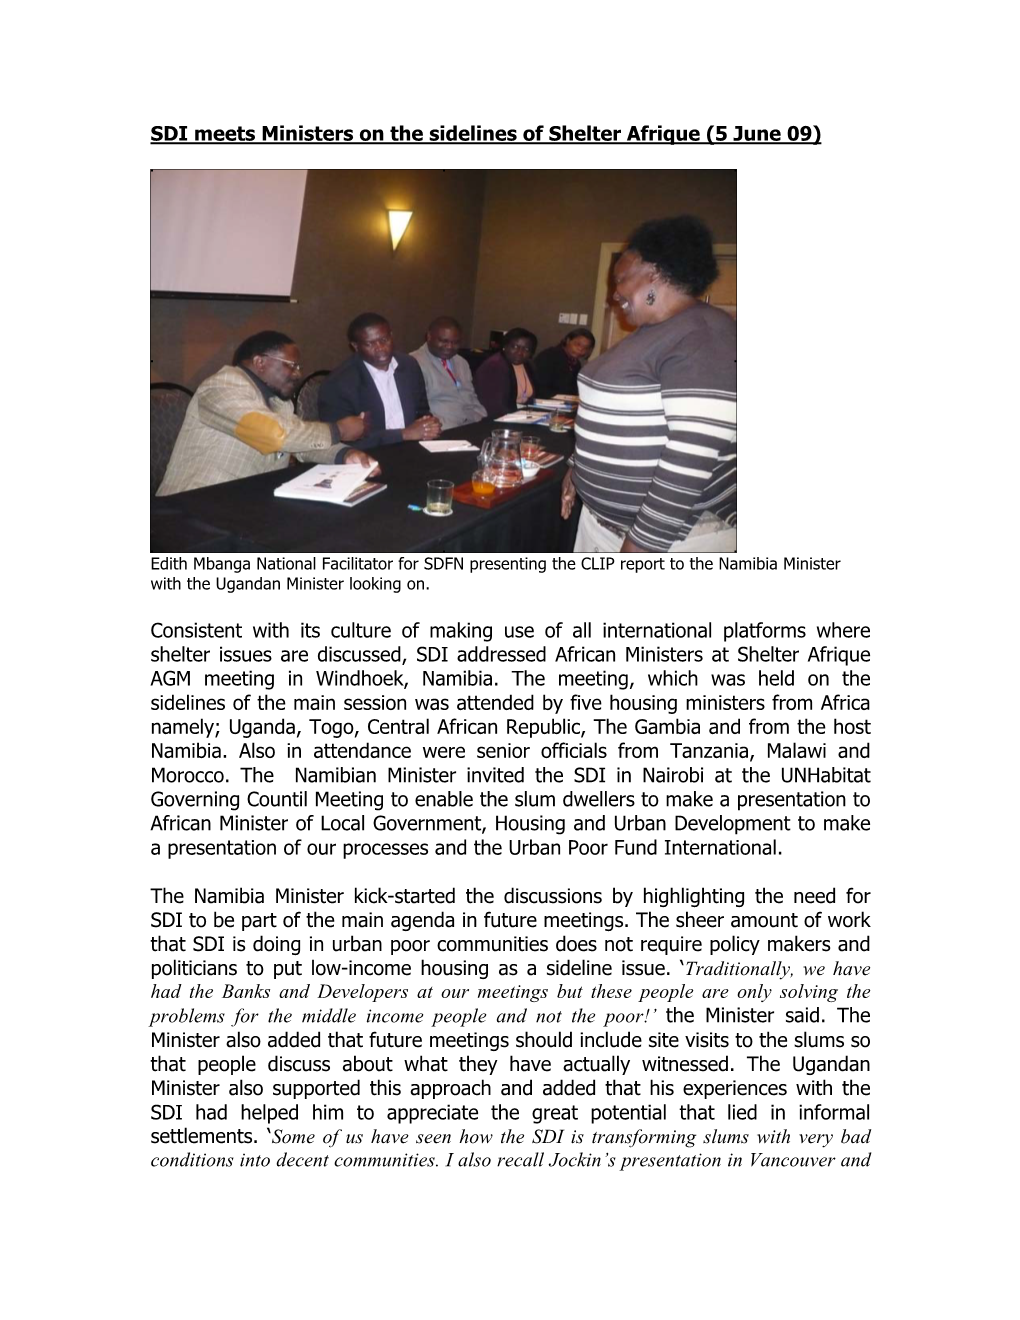 SDI Meets Ministers on the Sidelines of Shelter Afrique (5 June 09)